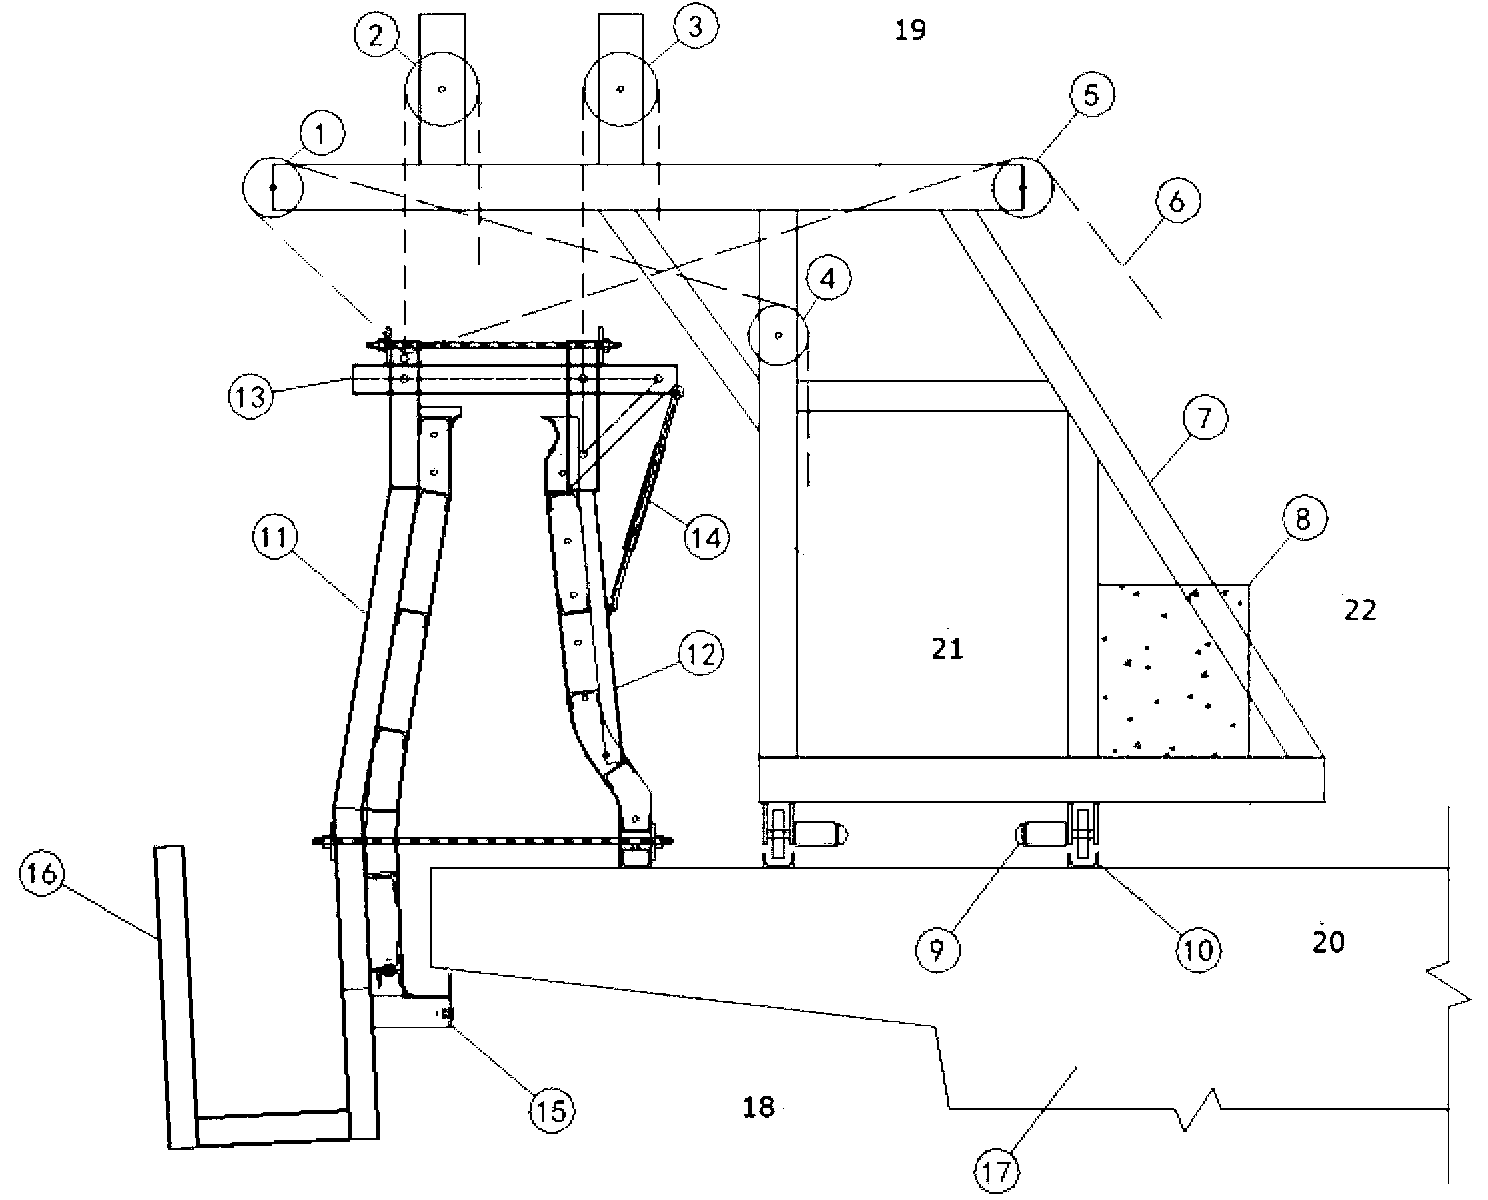 Construction method of cast-in-place concrete crash barrier with eaves